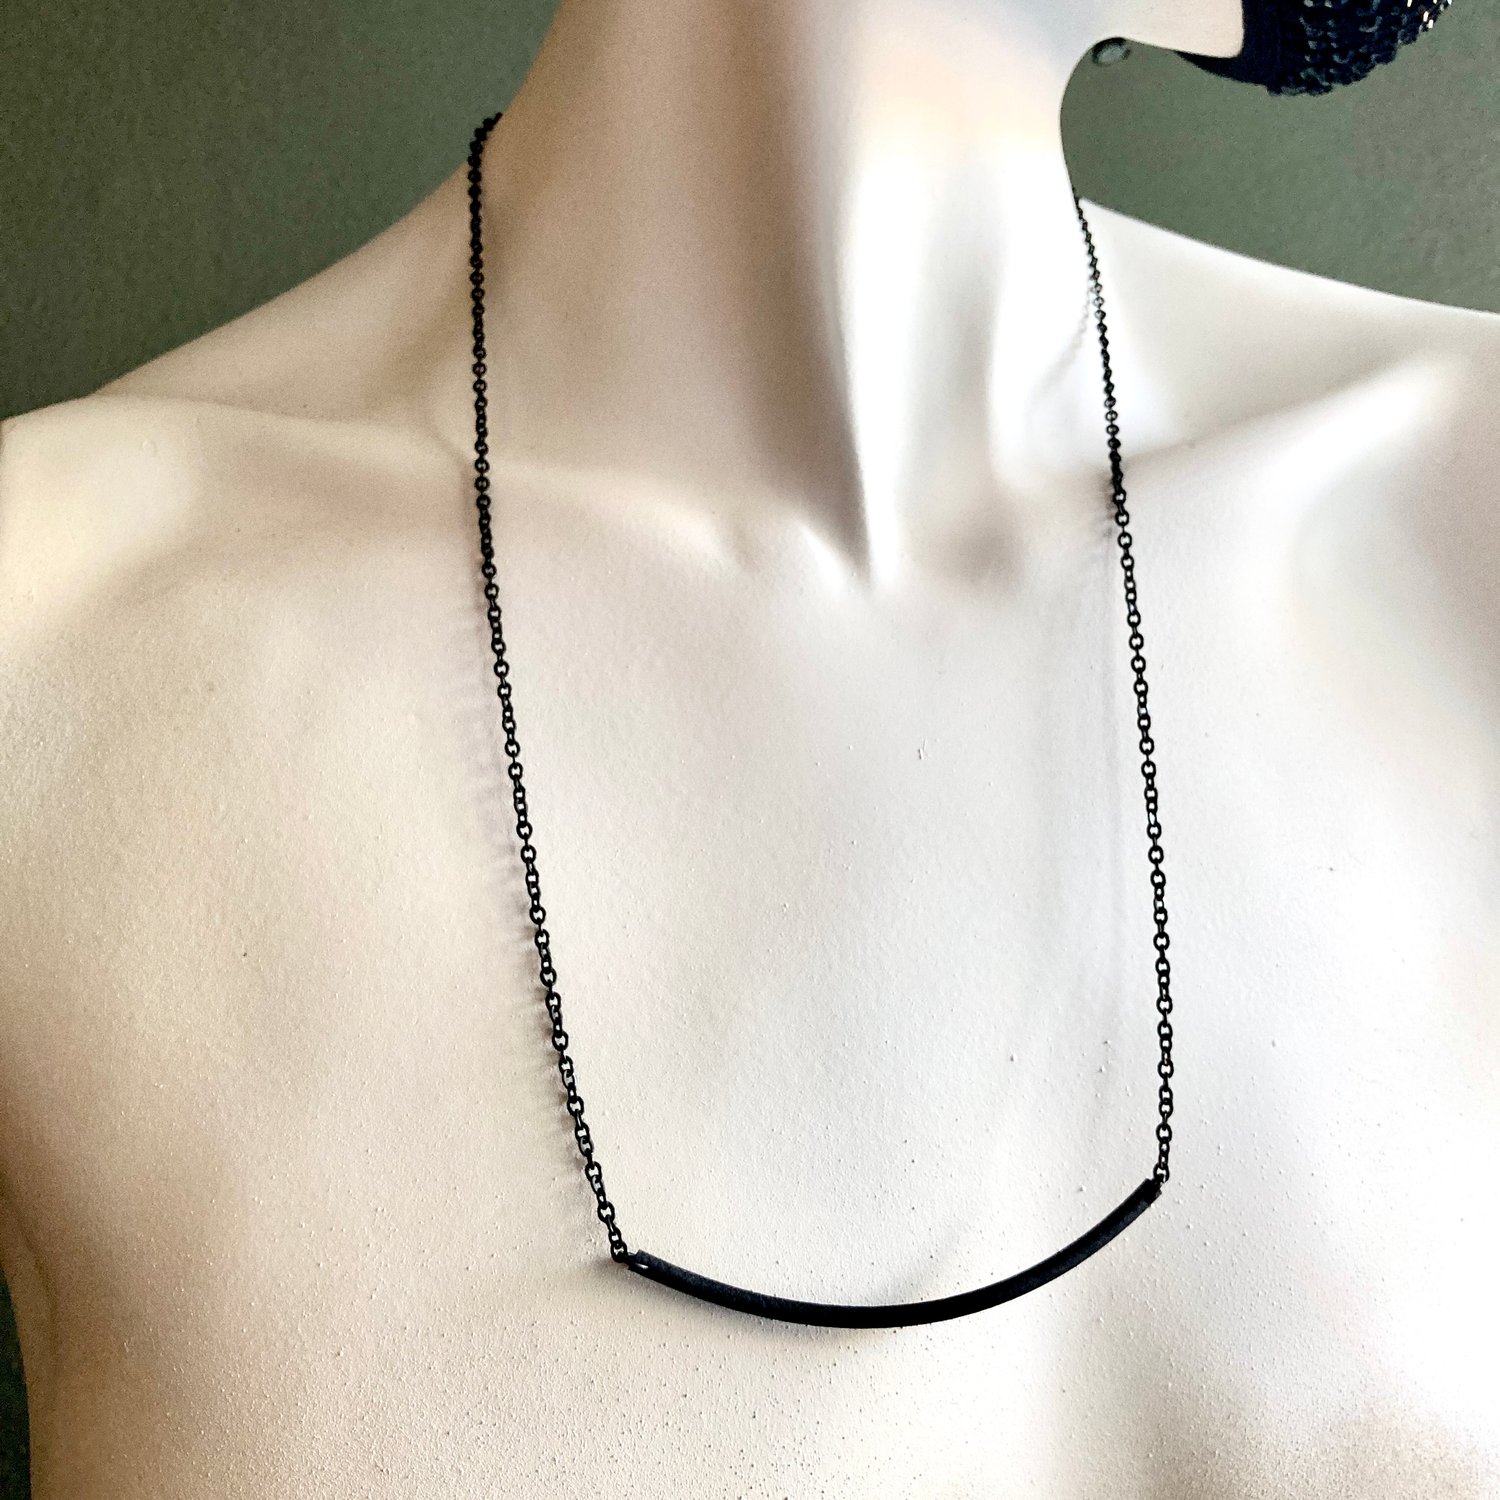 Image of 26.5" Black Stainless & Rubber Convertible Necklace/Mask Chain w/Gunmetal Ball Magnet 